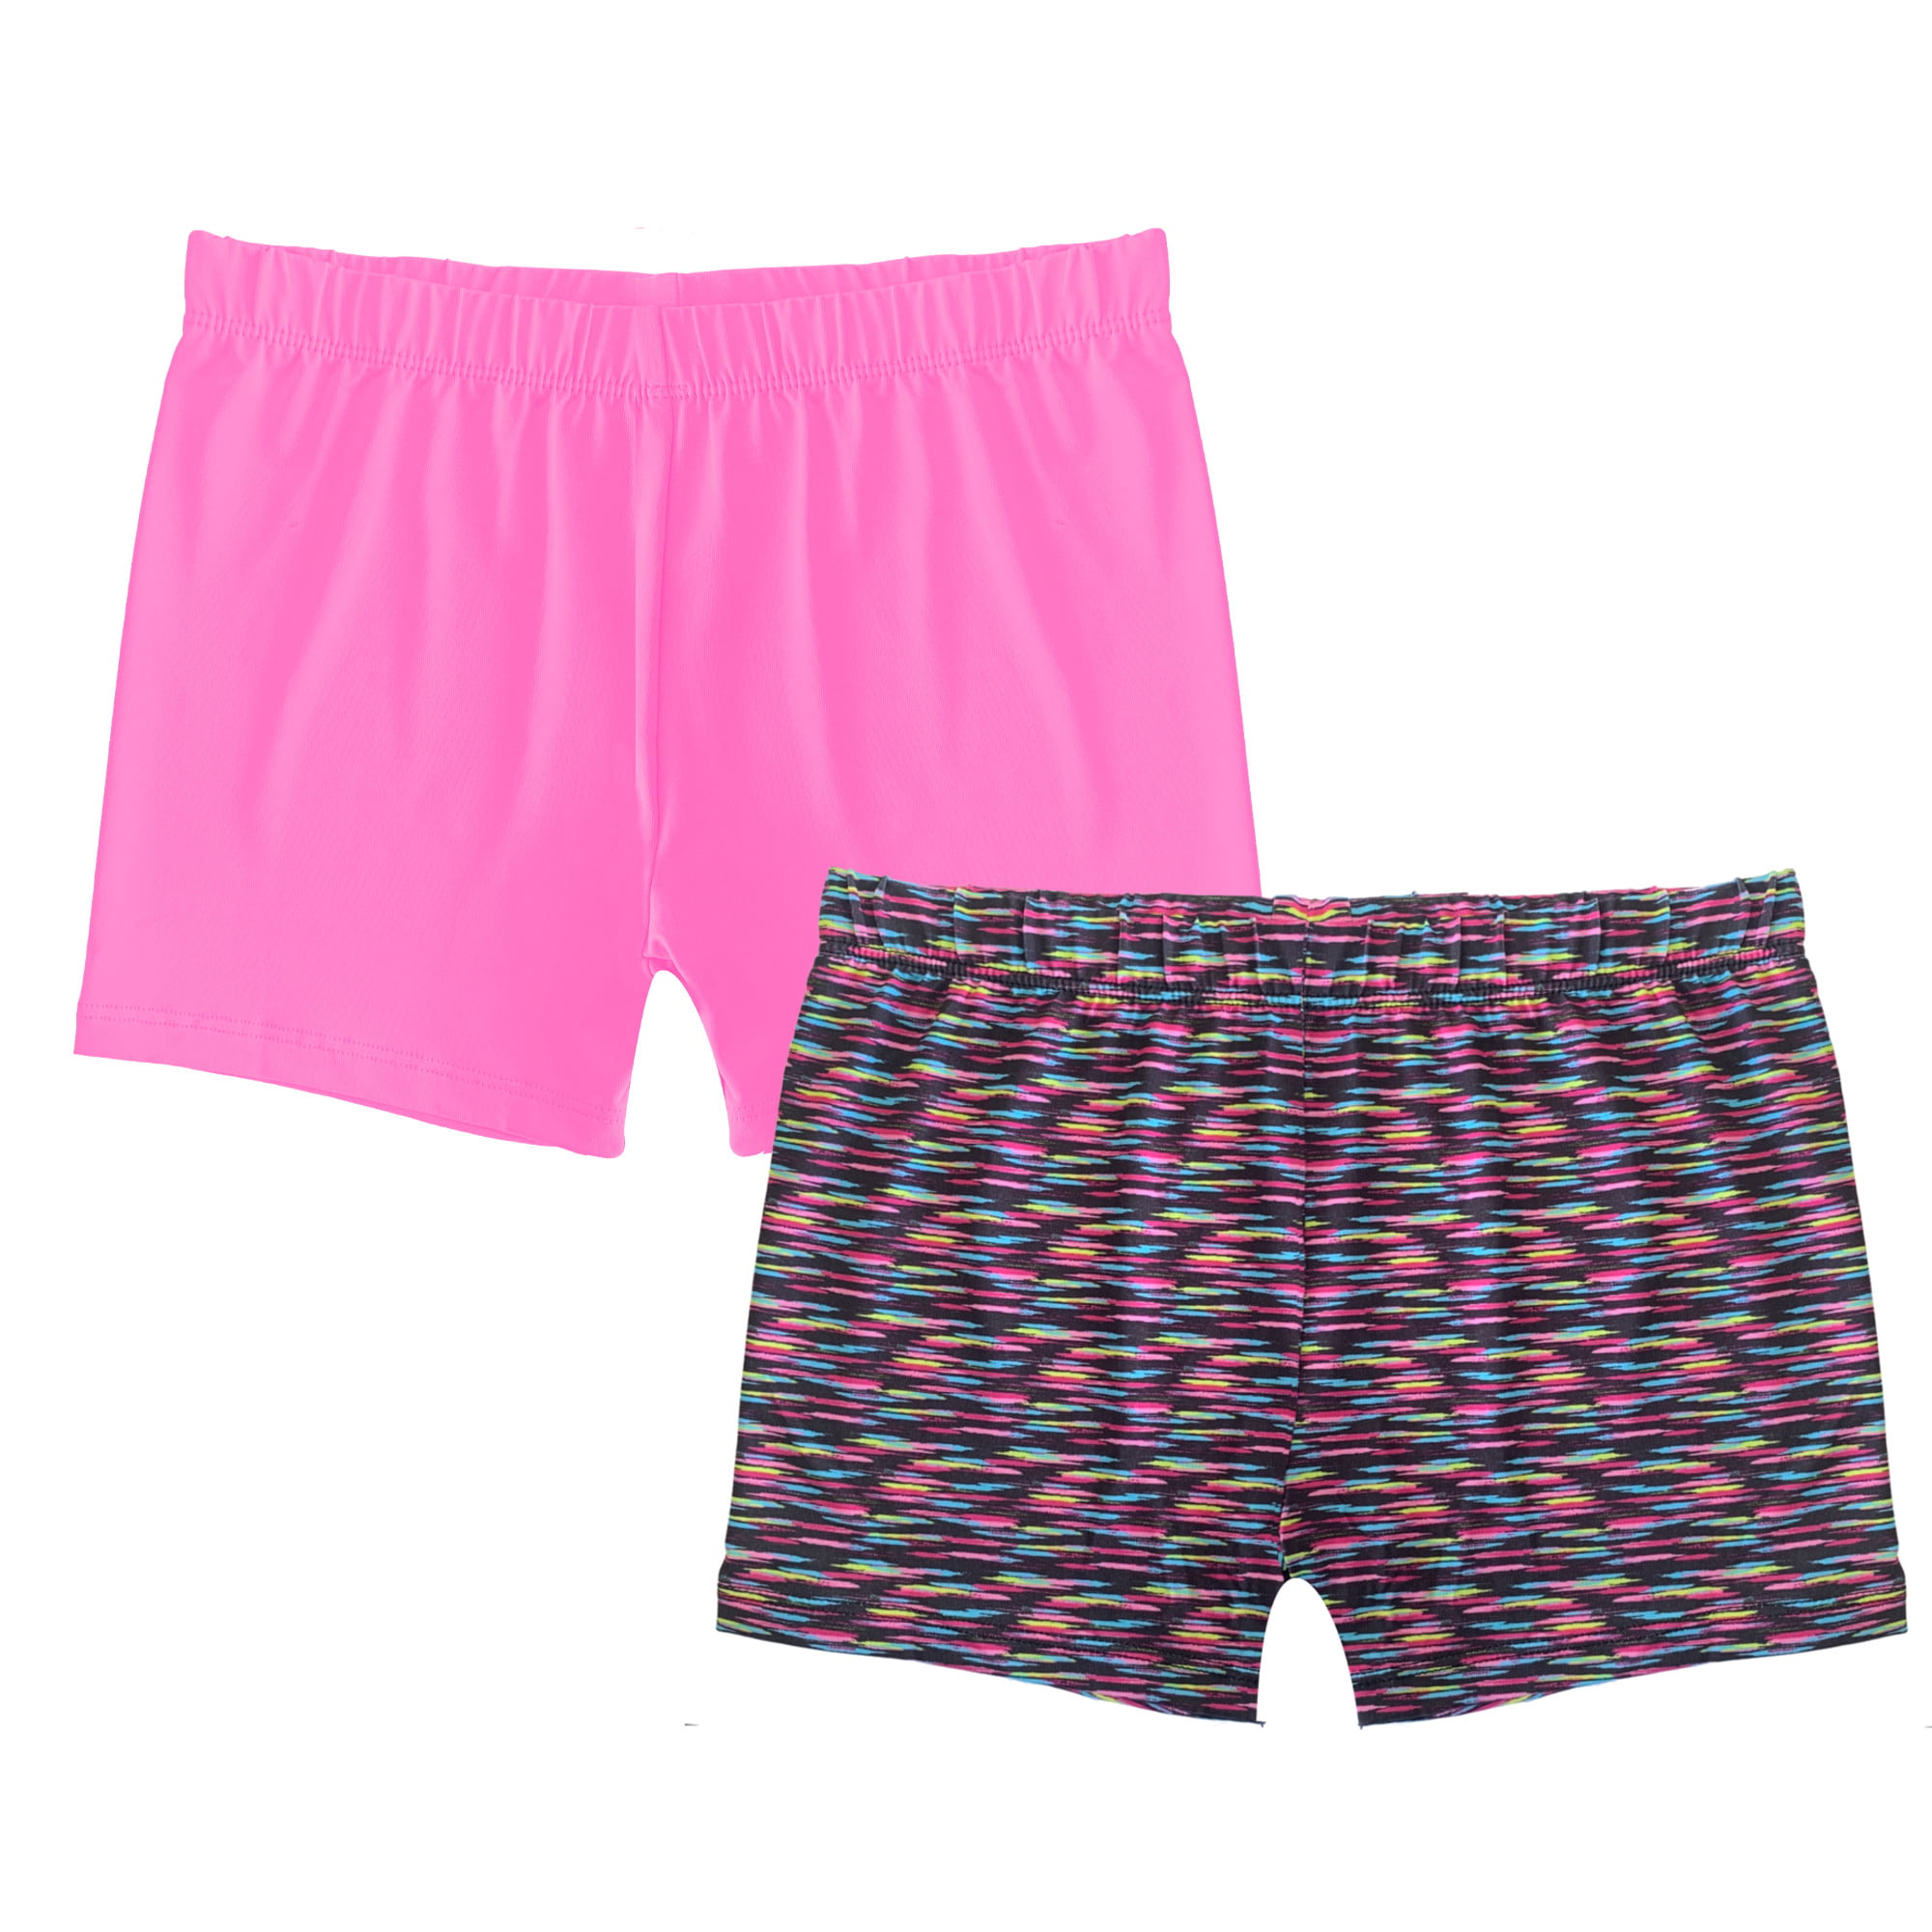 playground shorts for under dresses